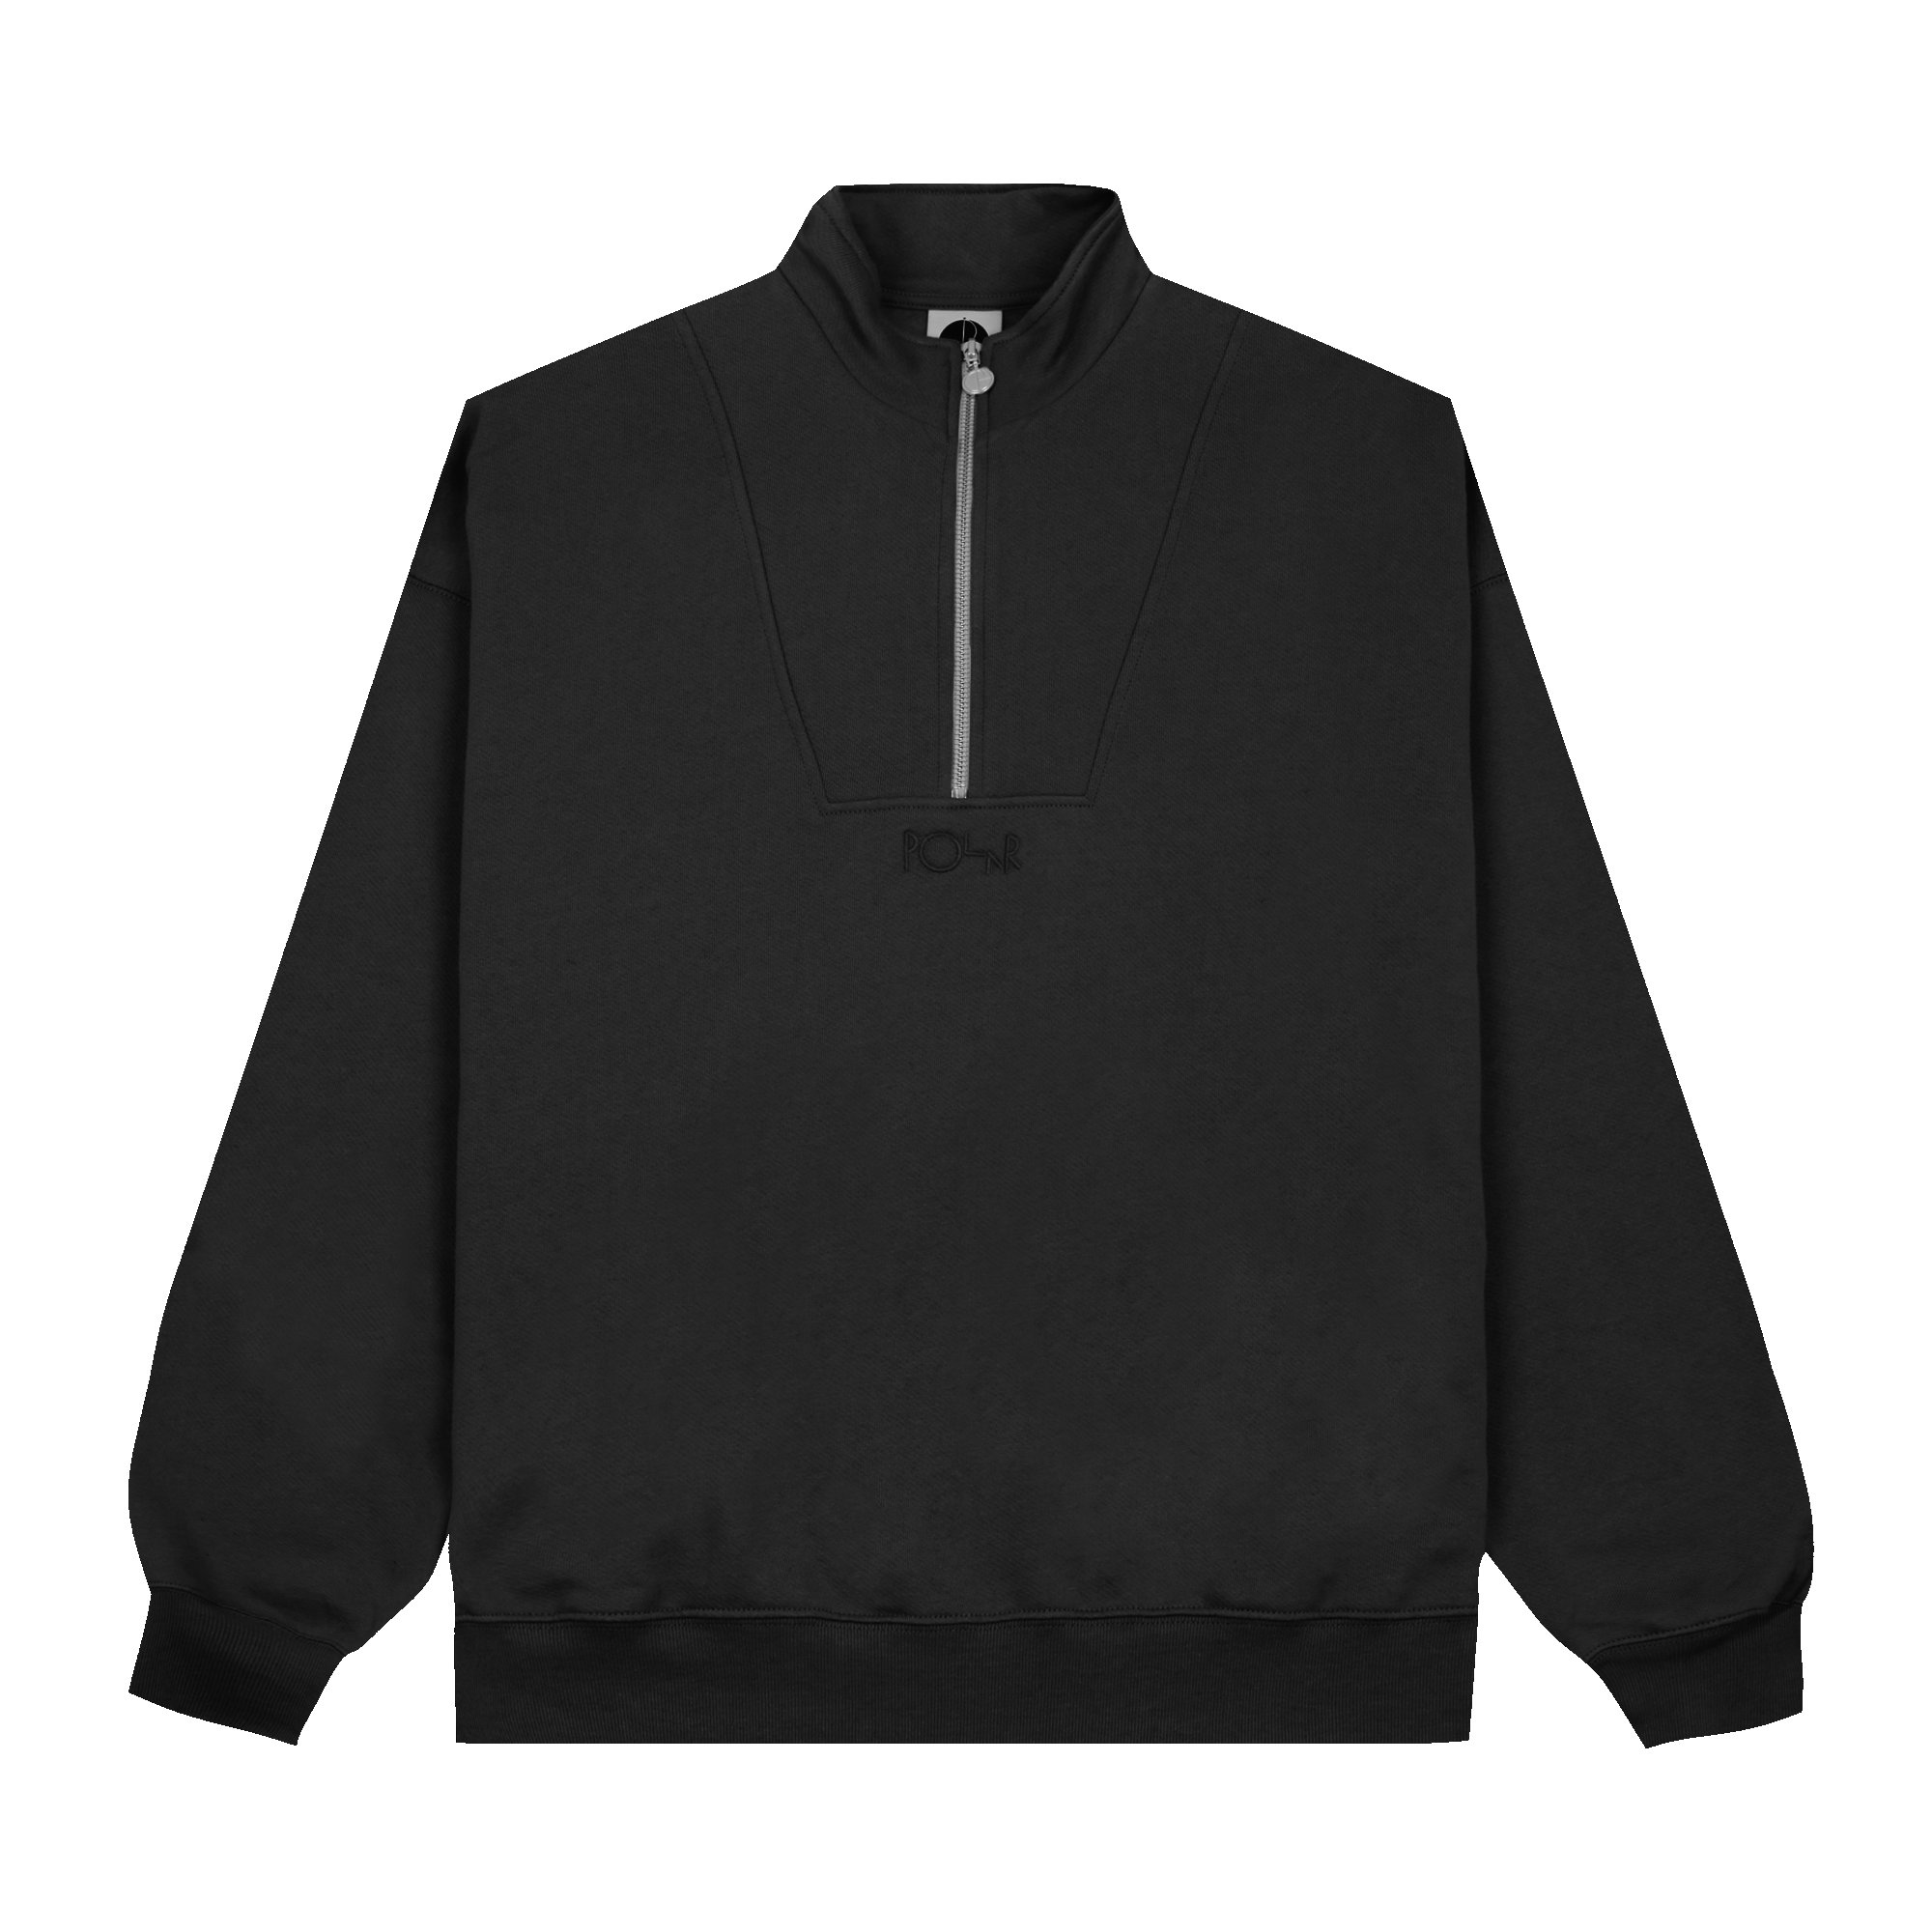 Black Sweatshirt Pullover PNG Free Picture